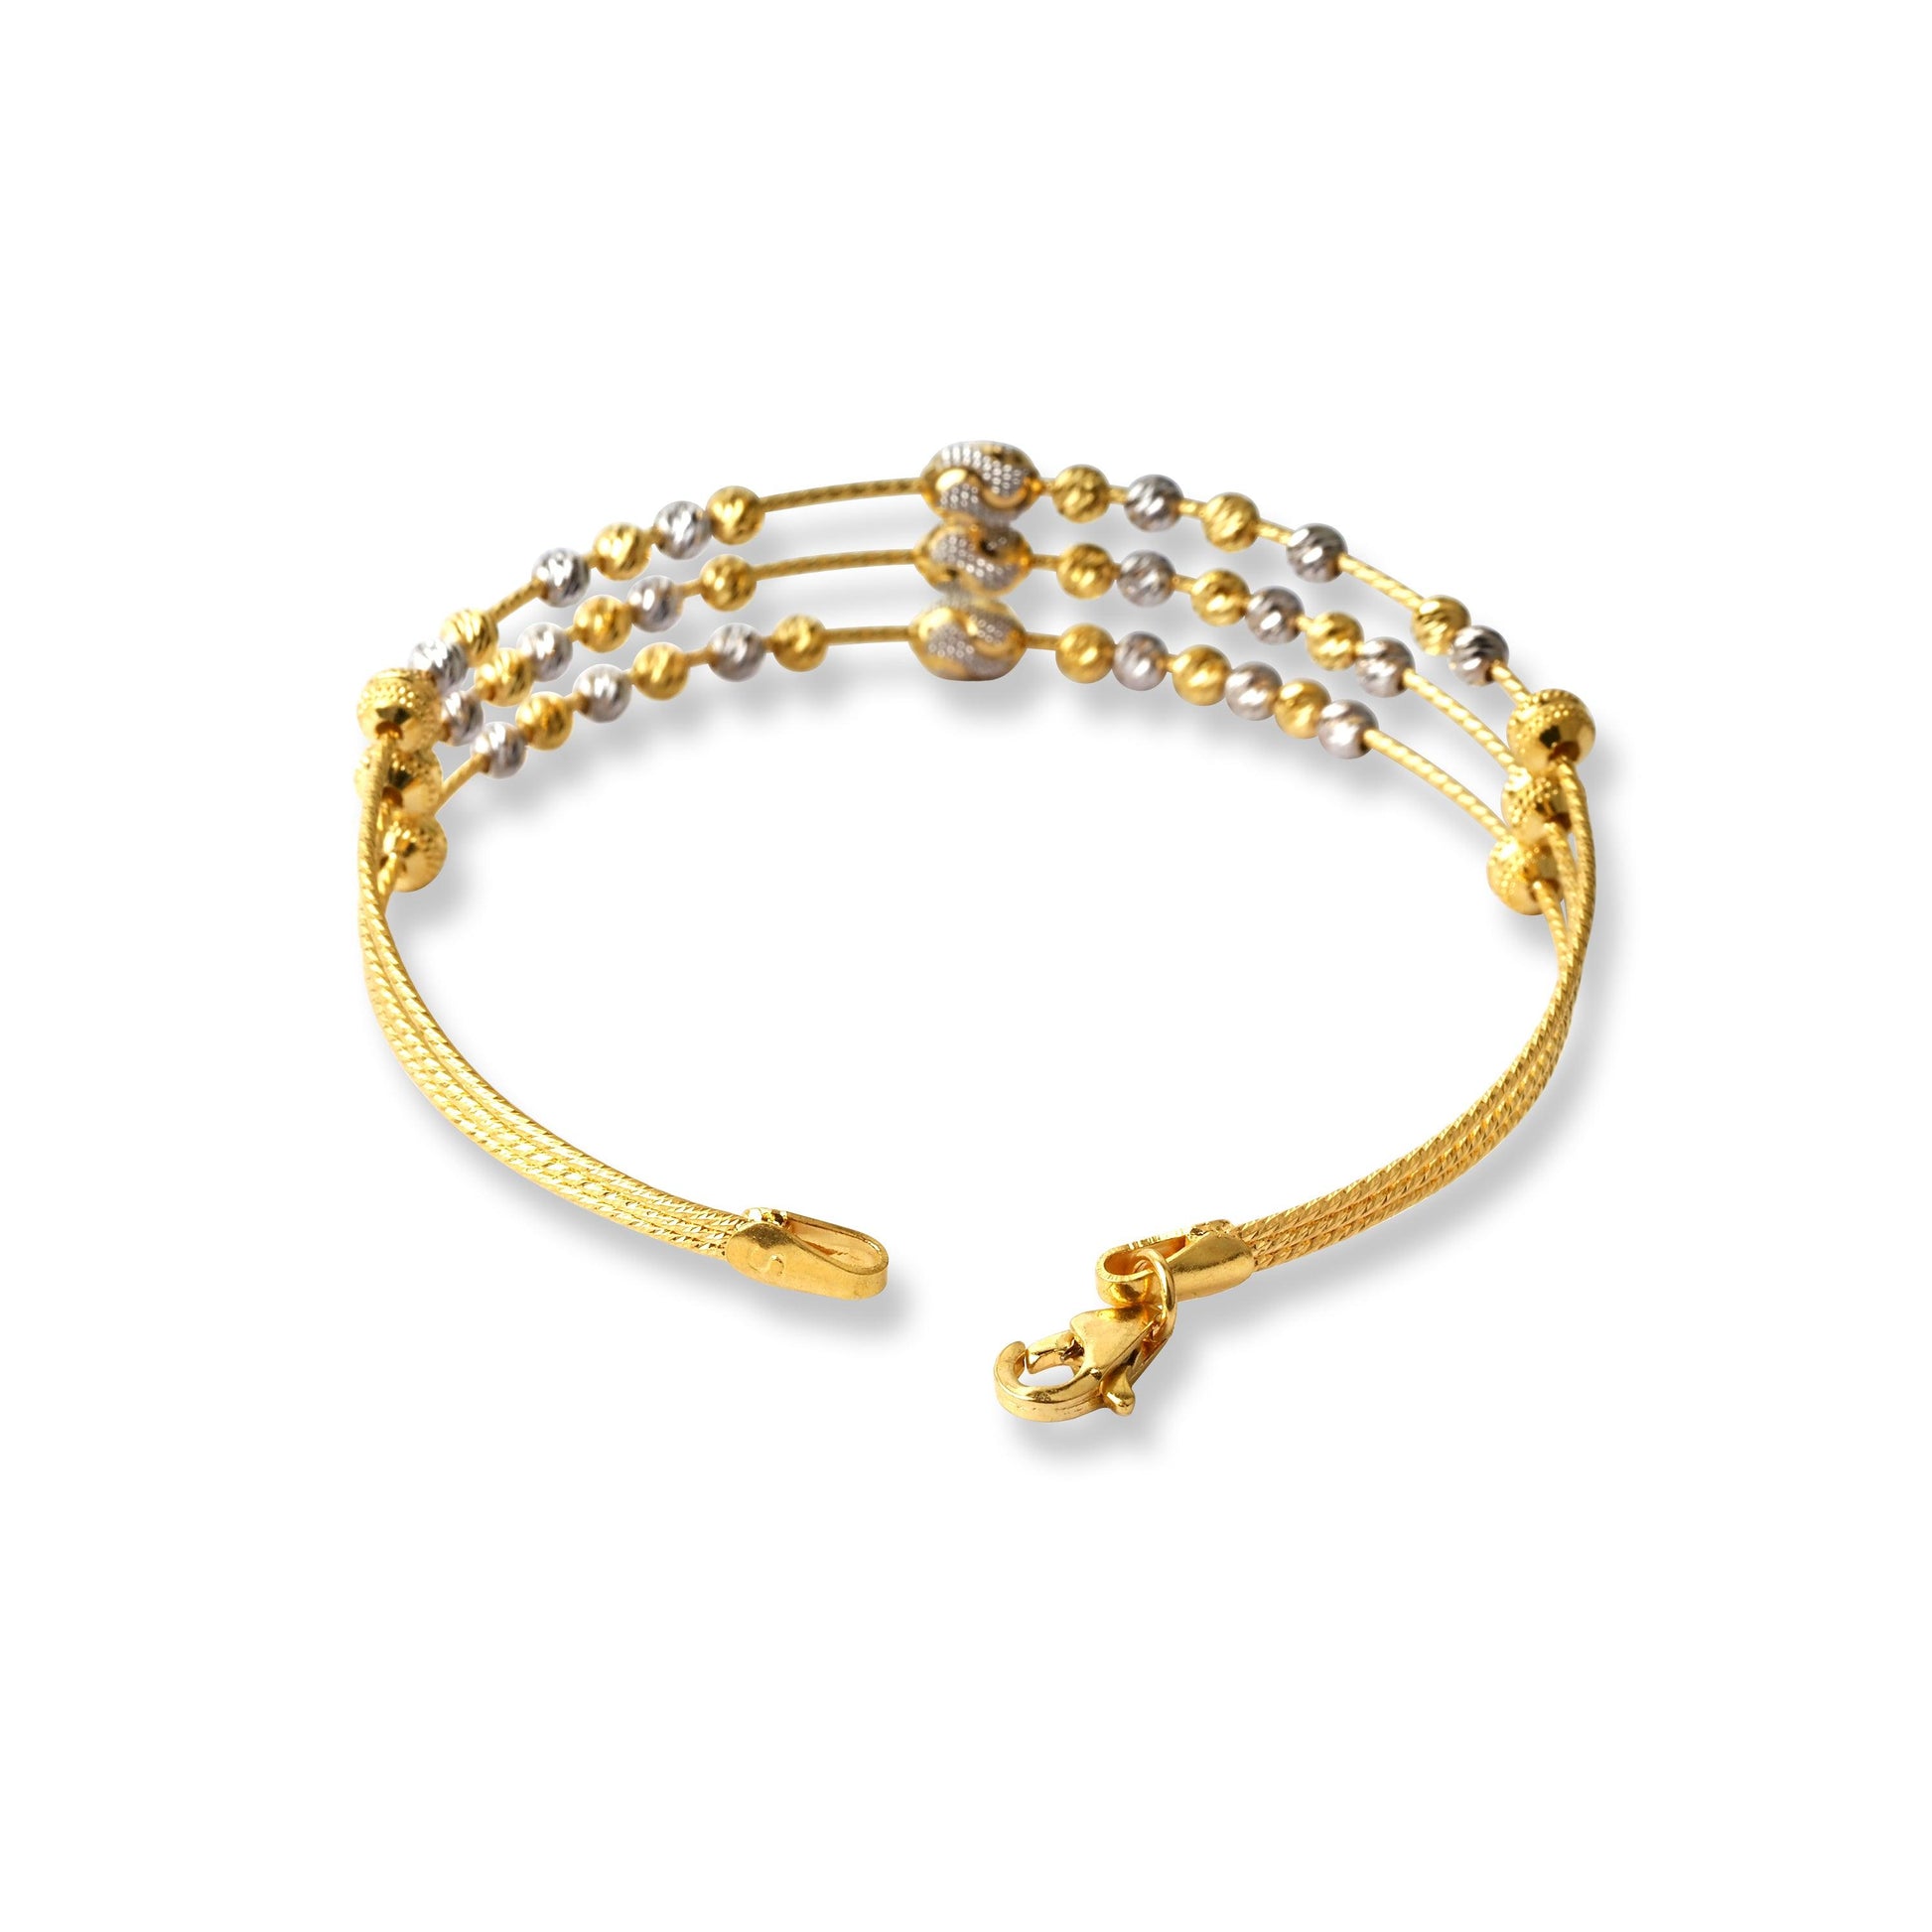 22ct Gold Rhodium Plated Beads Bangle With Rounded Trigger Clasp (11.2g) B-8502 - Minar Jewellers